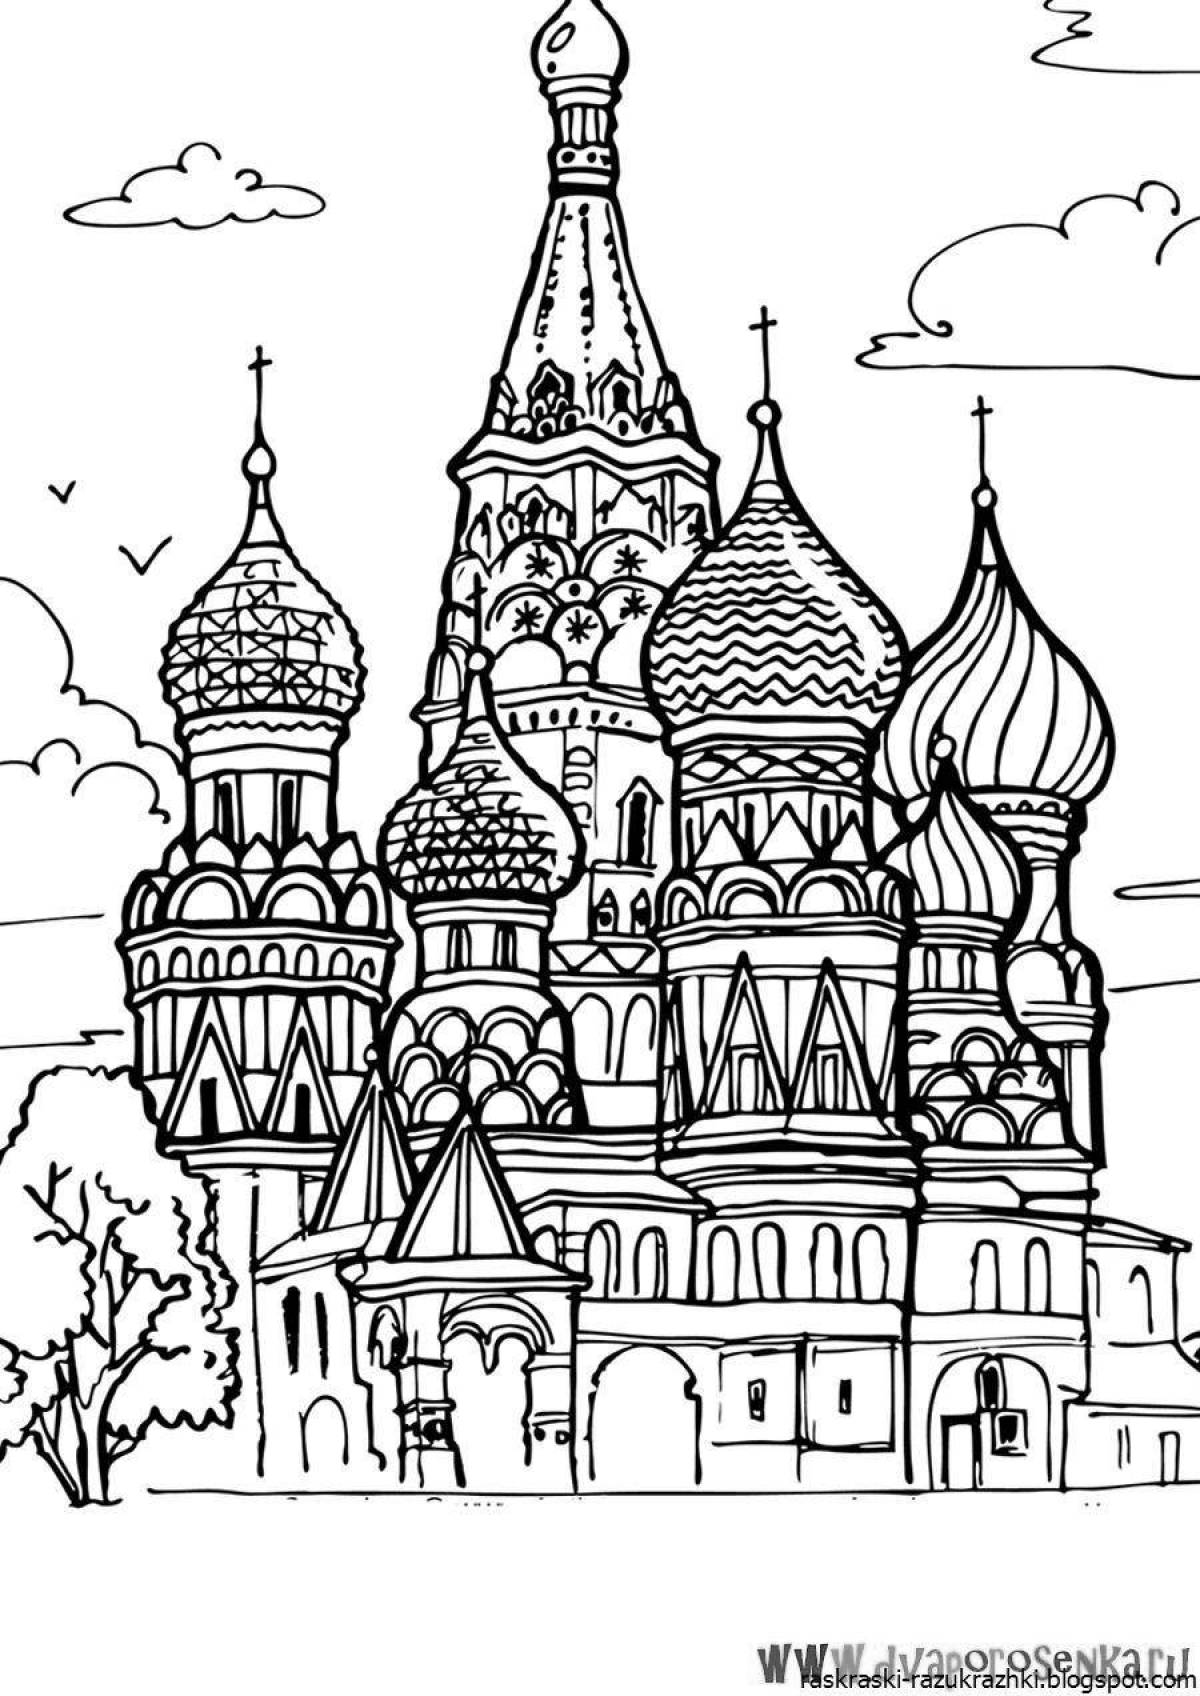 Impressive st basil's cathedral coloring page